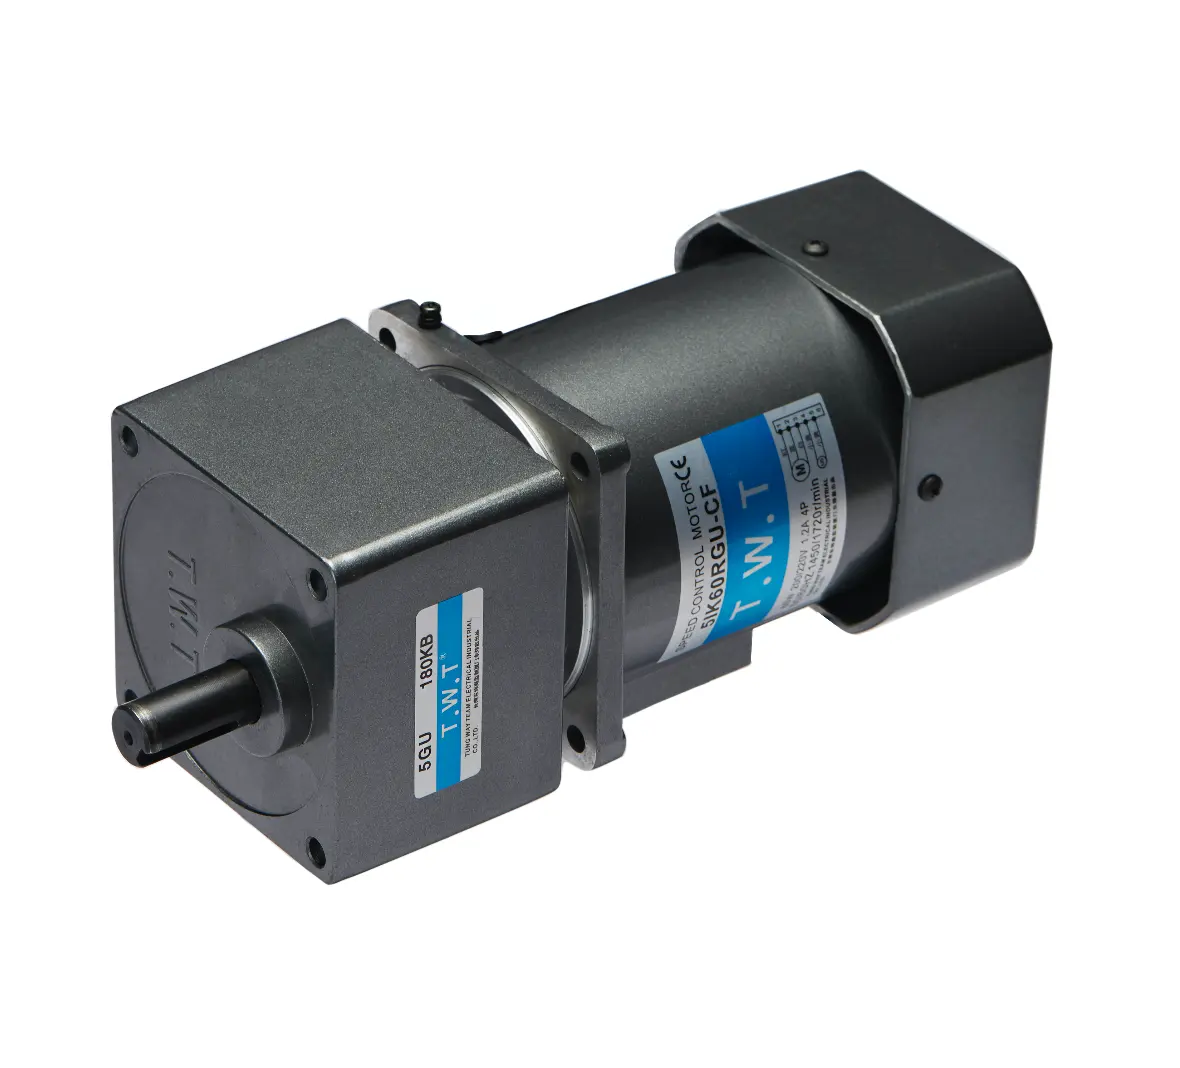 75K Heavy Duty Geared Motor 4IK25GN-C Single Phase Low Constant Speed CW/CCW Gear Motor with Capacitor AC 220V 25W Reduction Gear Motor